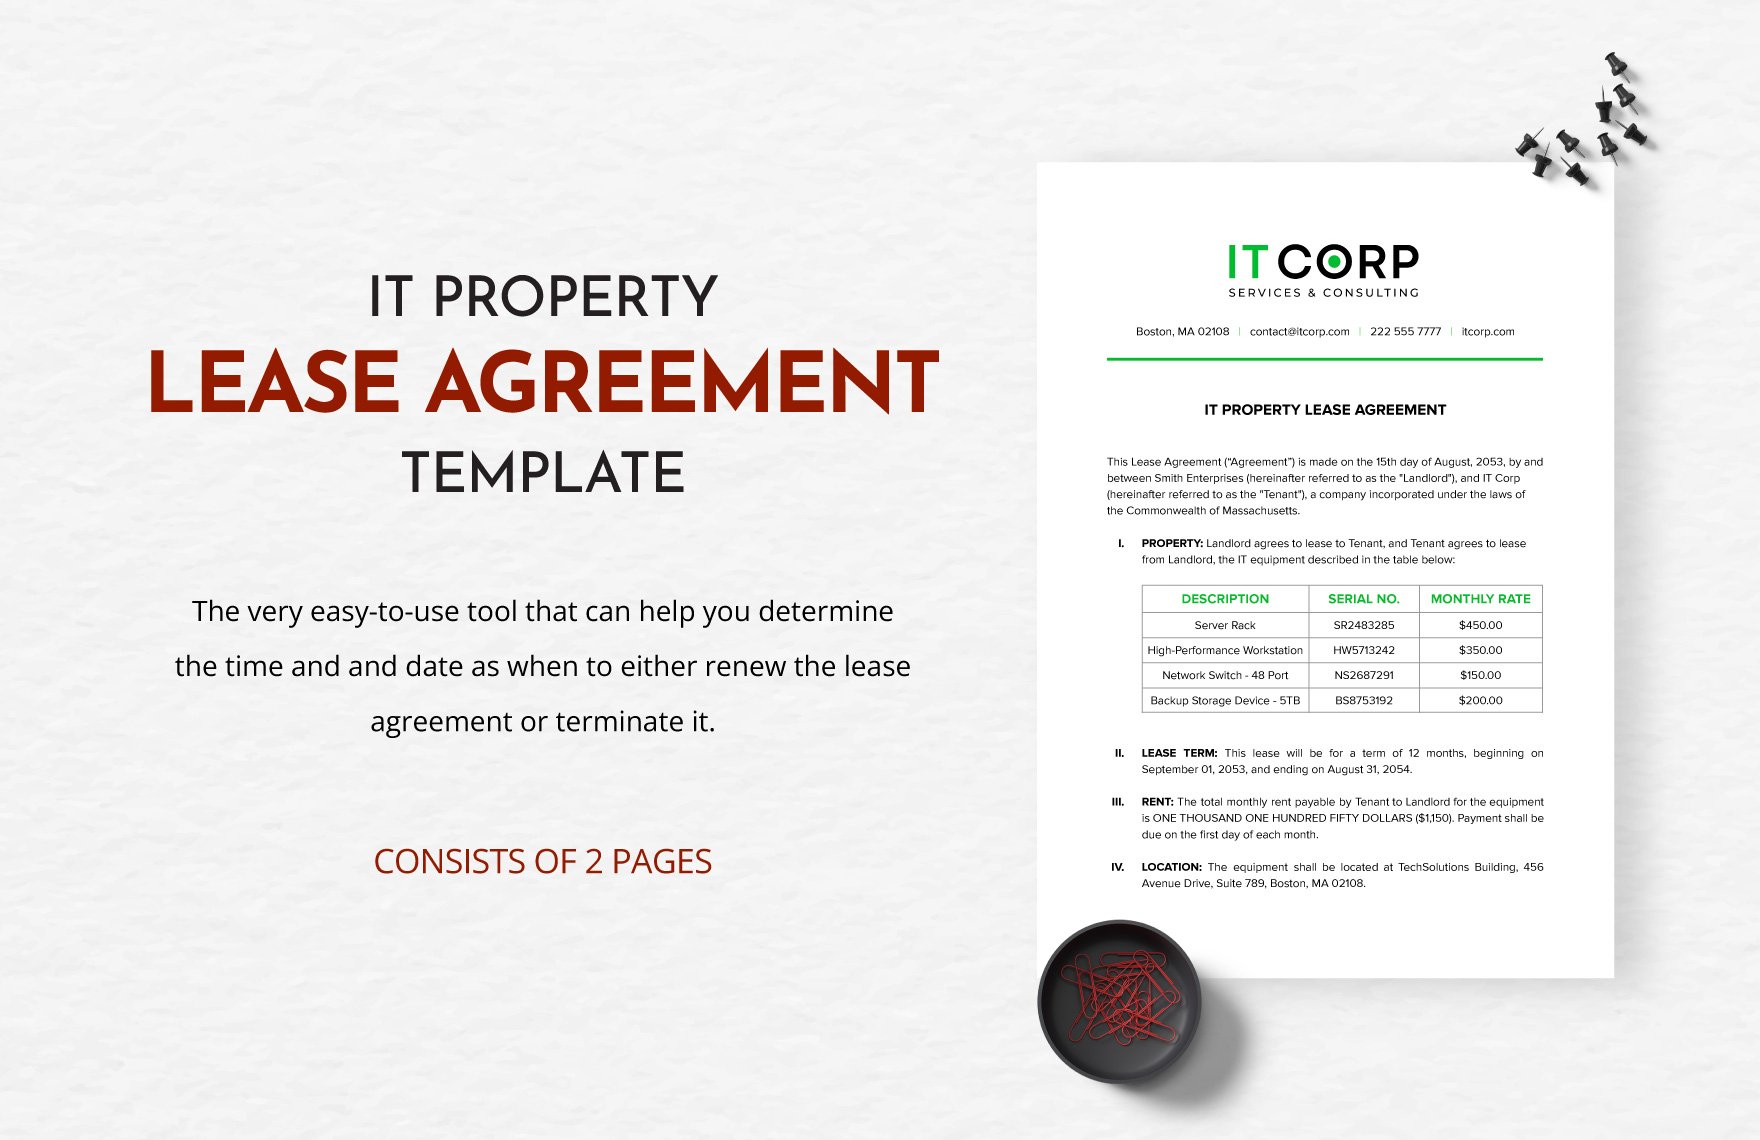 IT Property Lease Agreement Template in Word, Google Docs, PDF